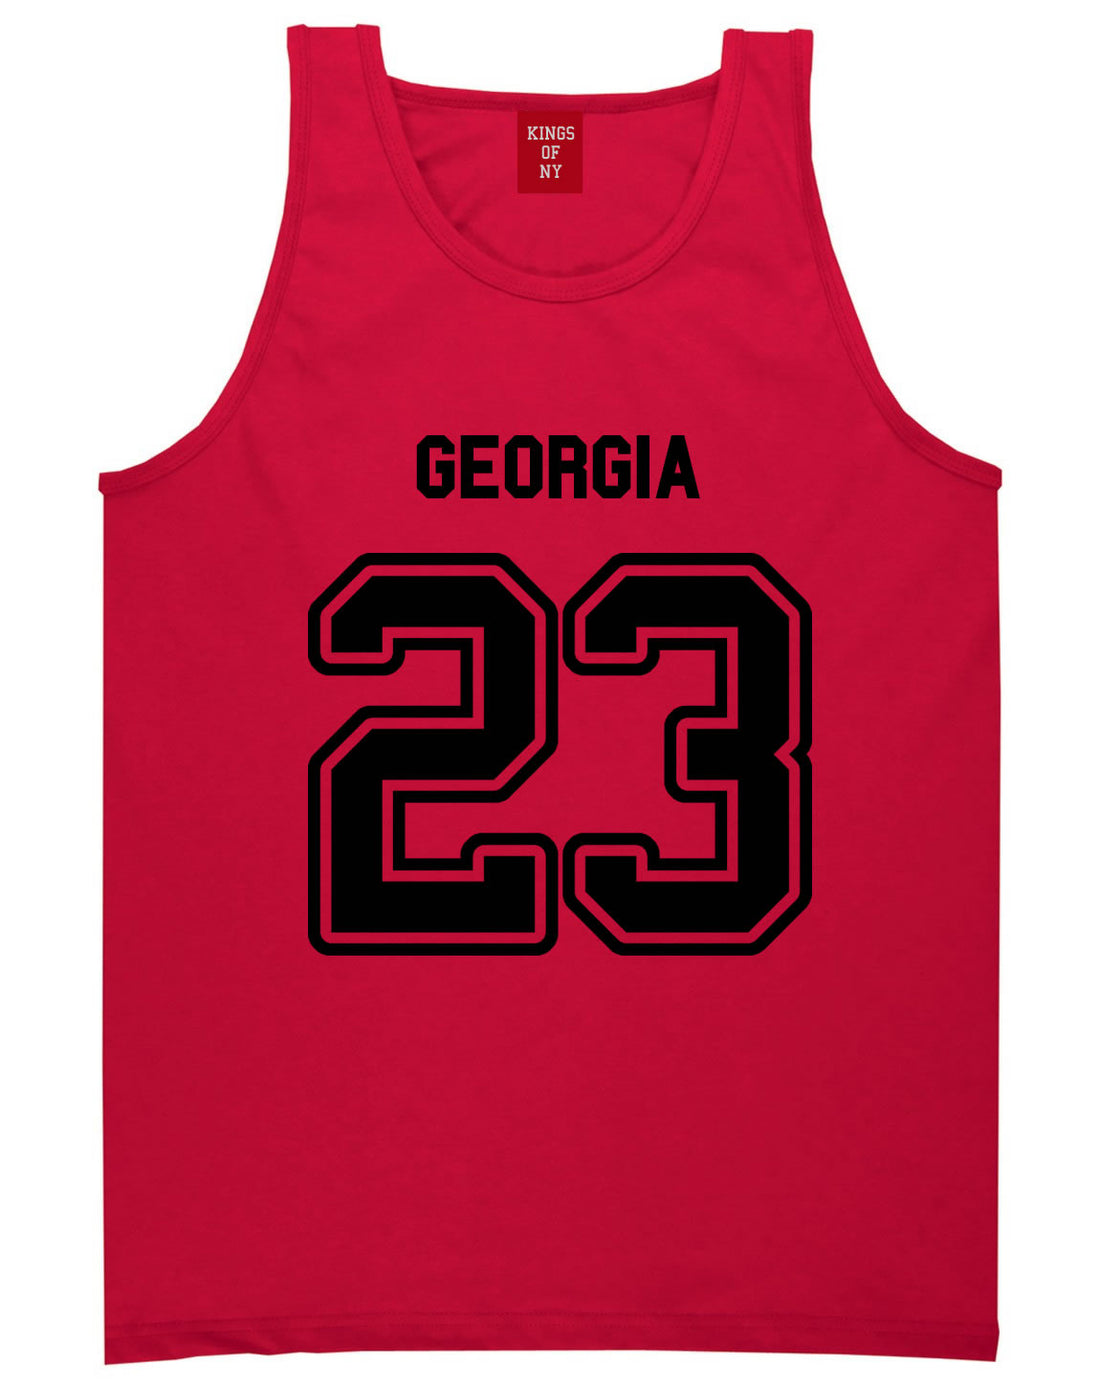 Sport Style Georgia 23 Team State Jersey Mens Tank Top By Kings Of NY